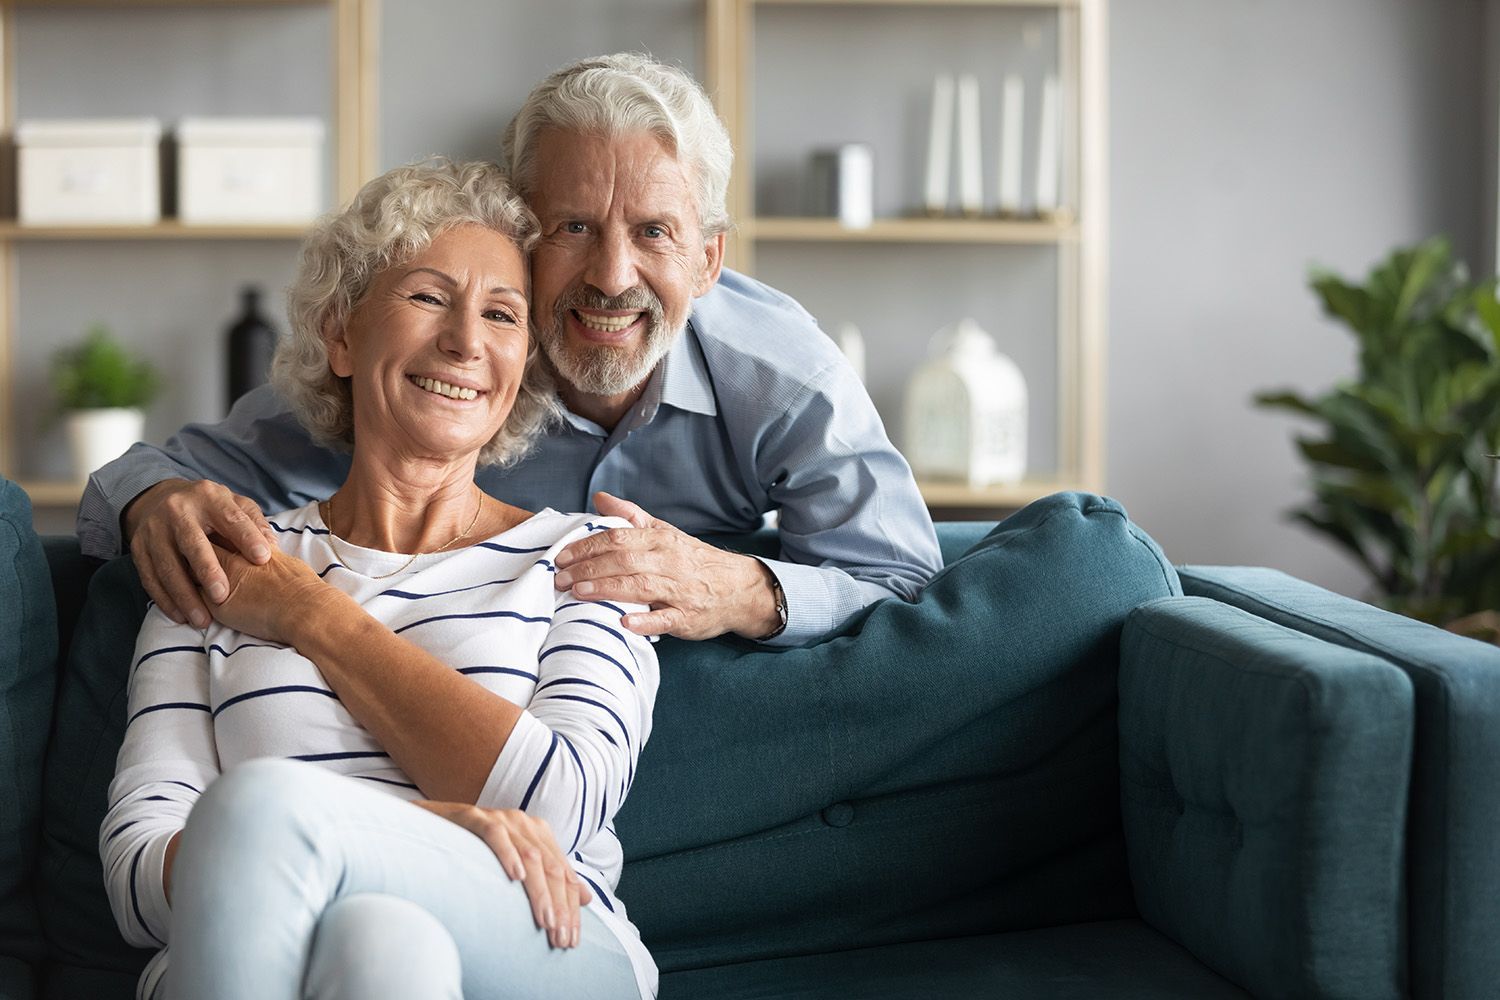 lady and man together in living room smiling happy